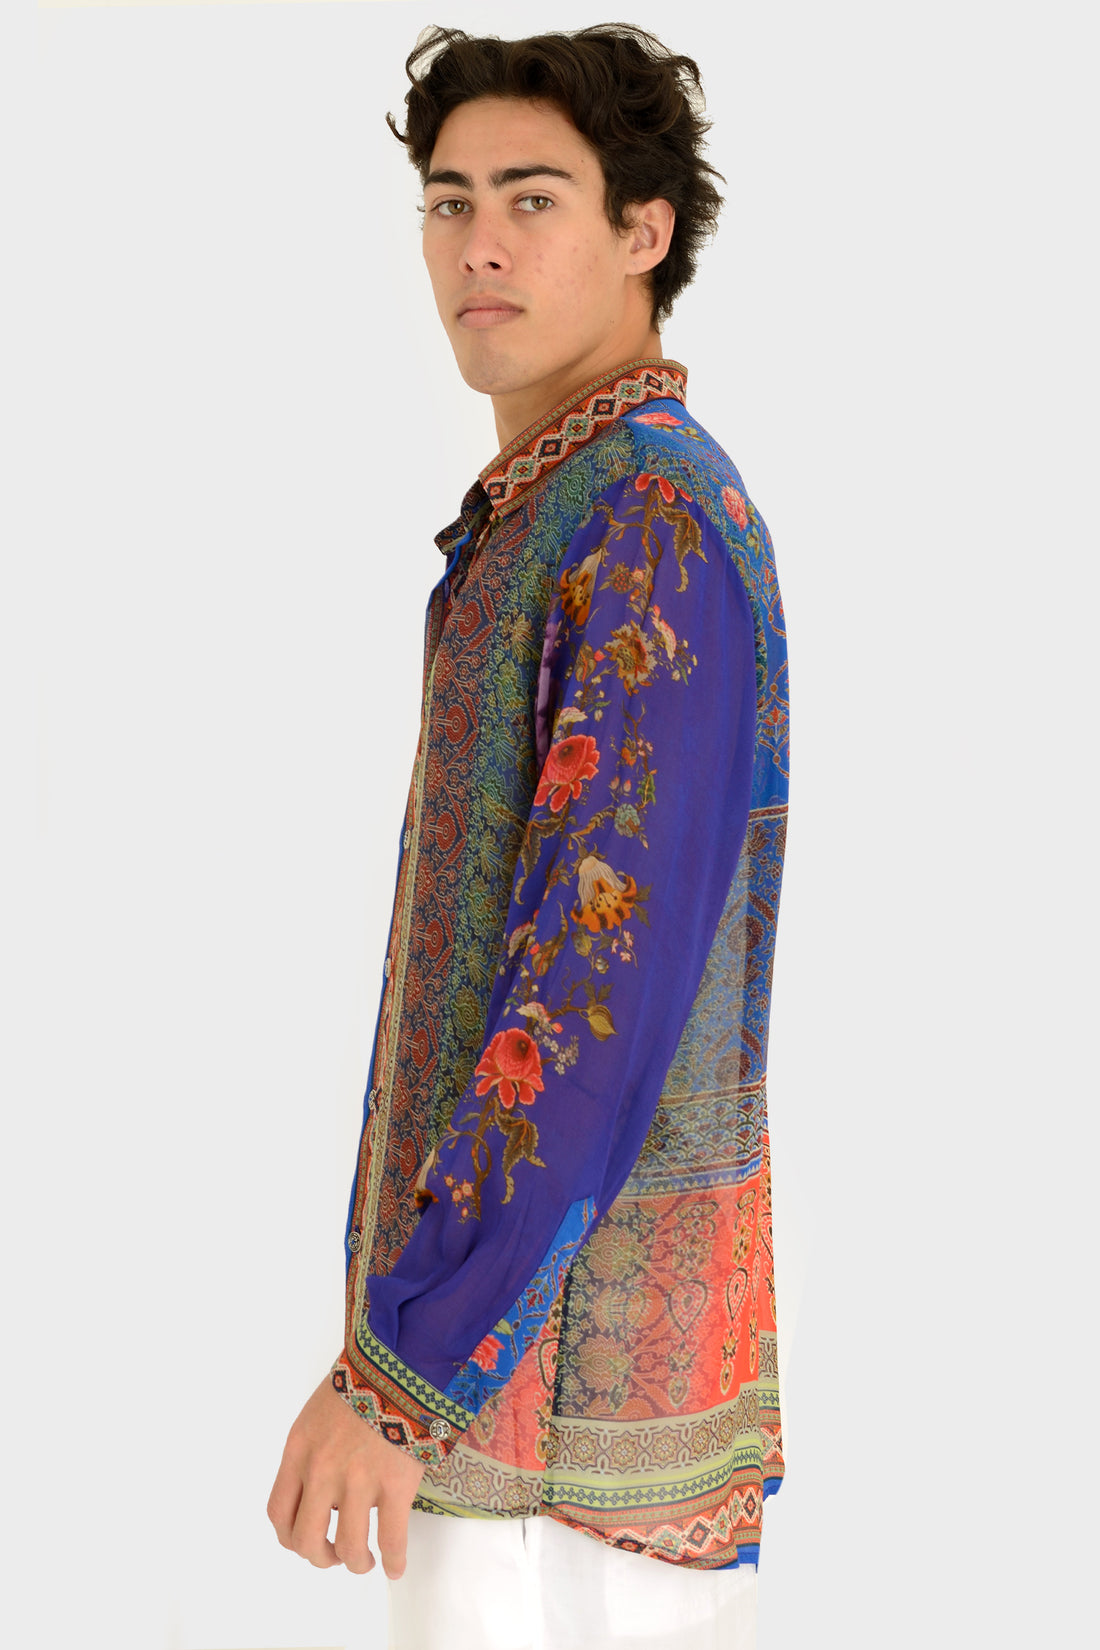 Barney - Original Tribal Print Rayon Digital Georgette Shirt With Hand Carved Bone Buttons (7389345906884)